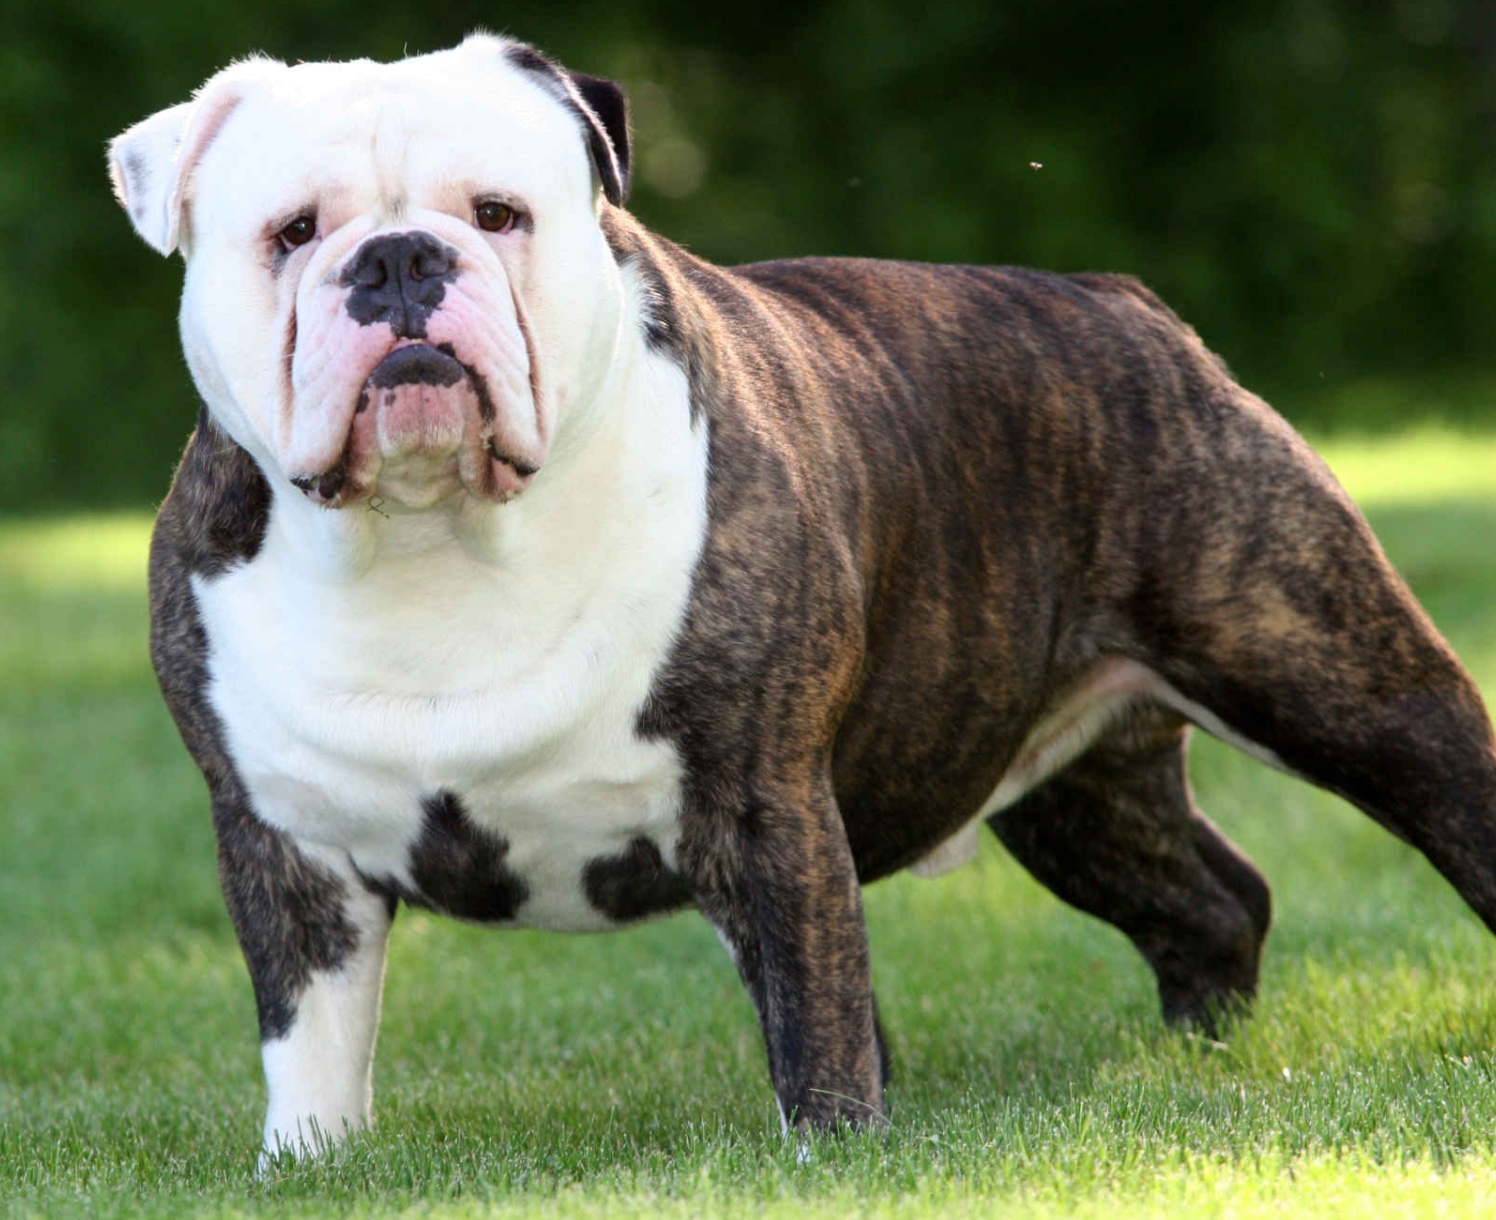 15 Types of Bulldog Breeds - The Ultimate Guide